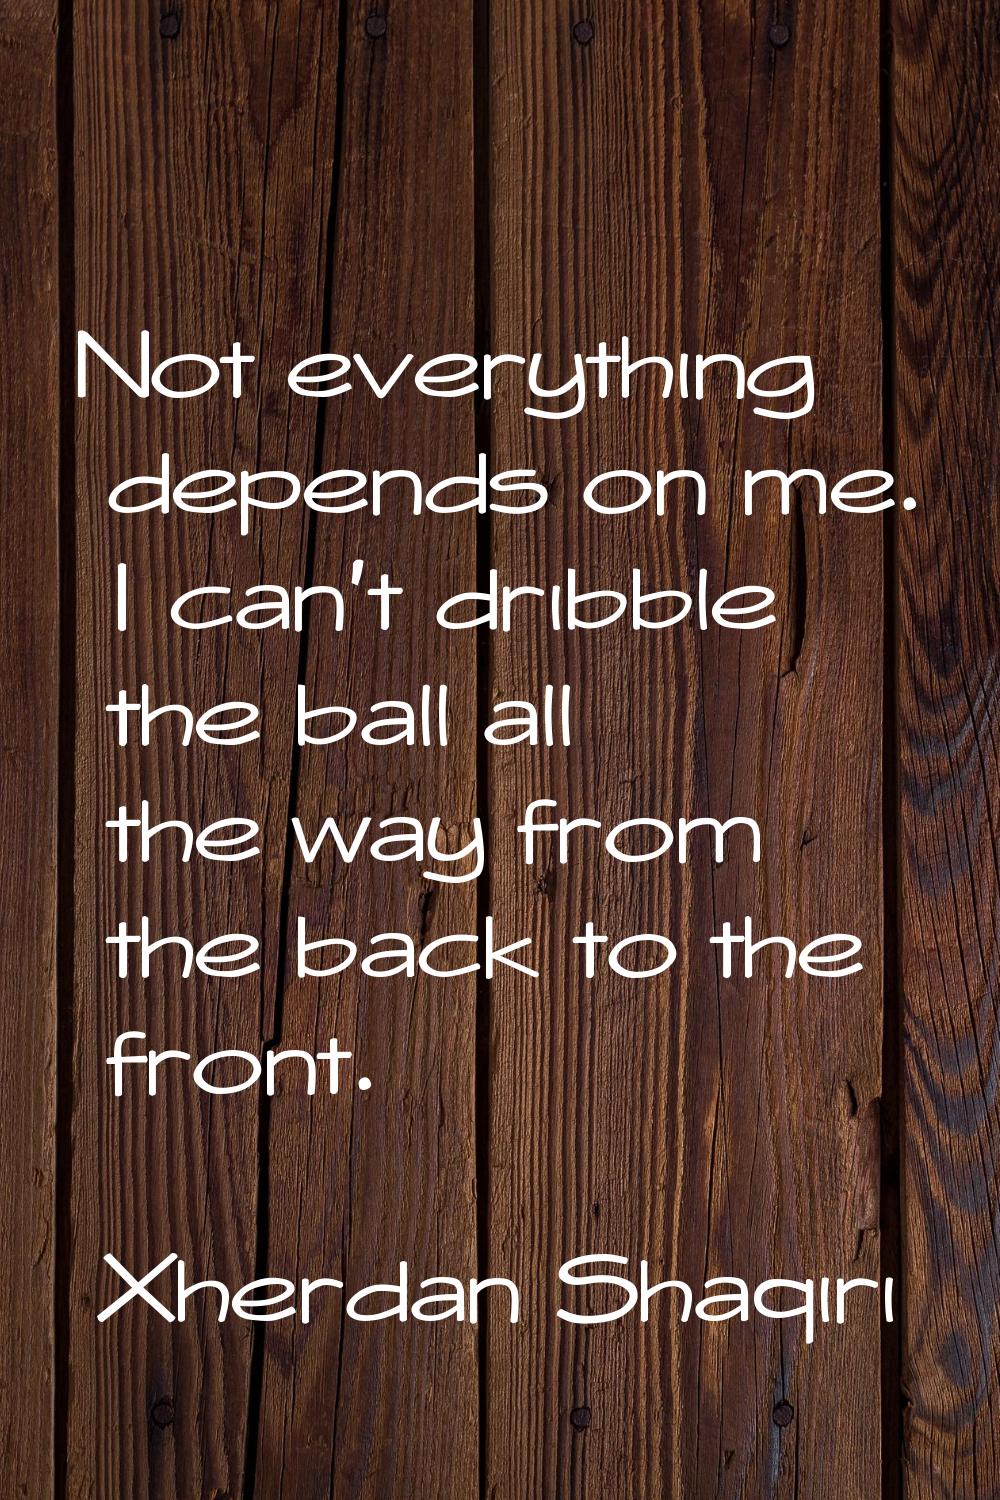 Not everything depends on me. I can't dribble the ball all the way from the back to the front.